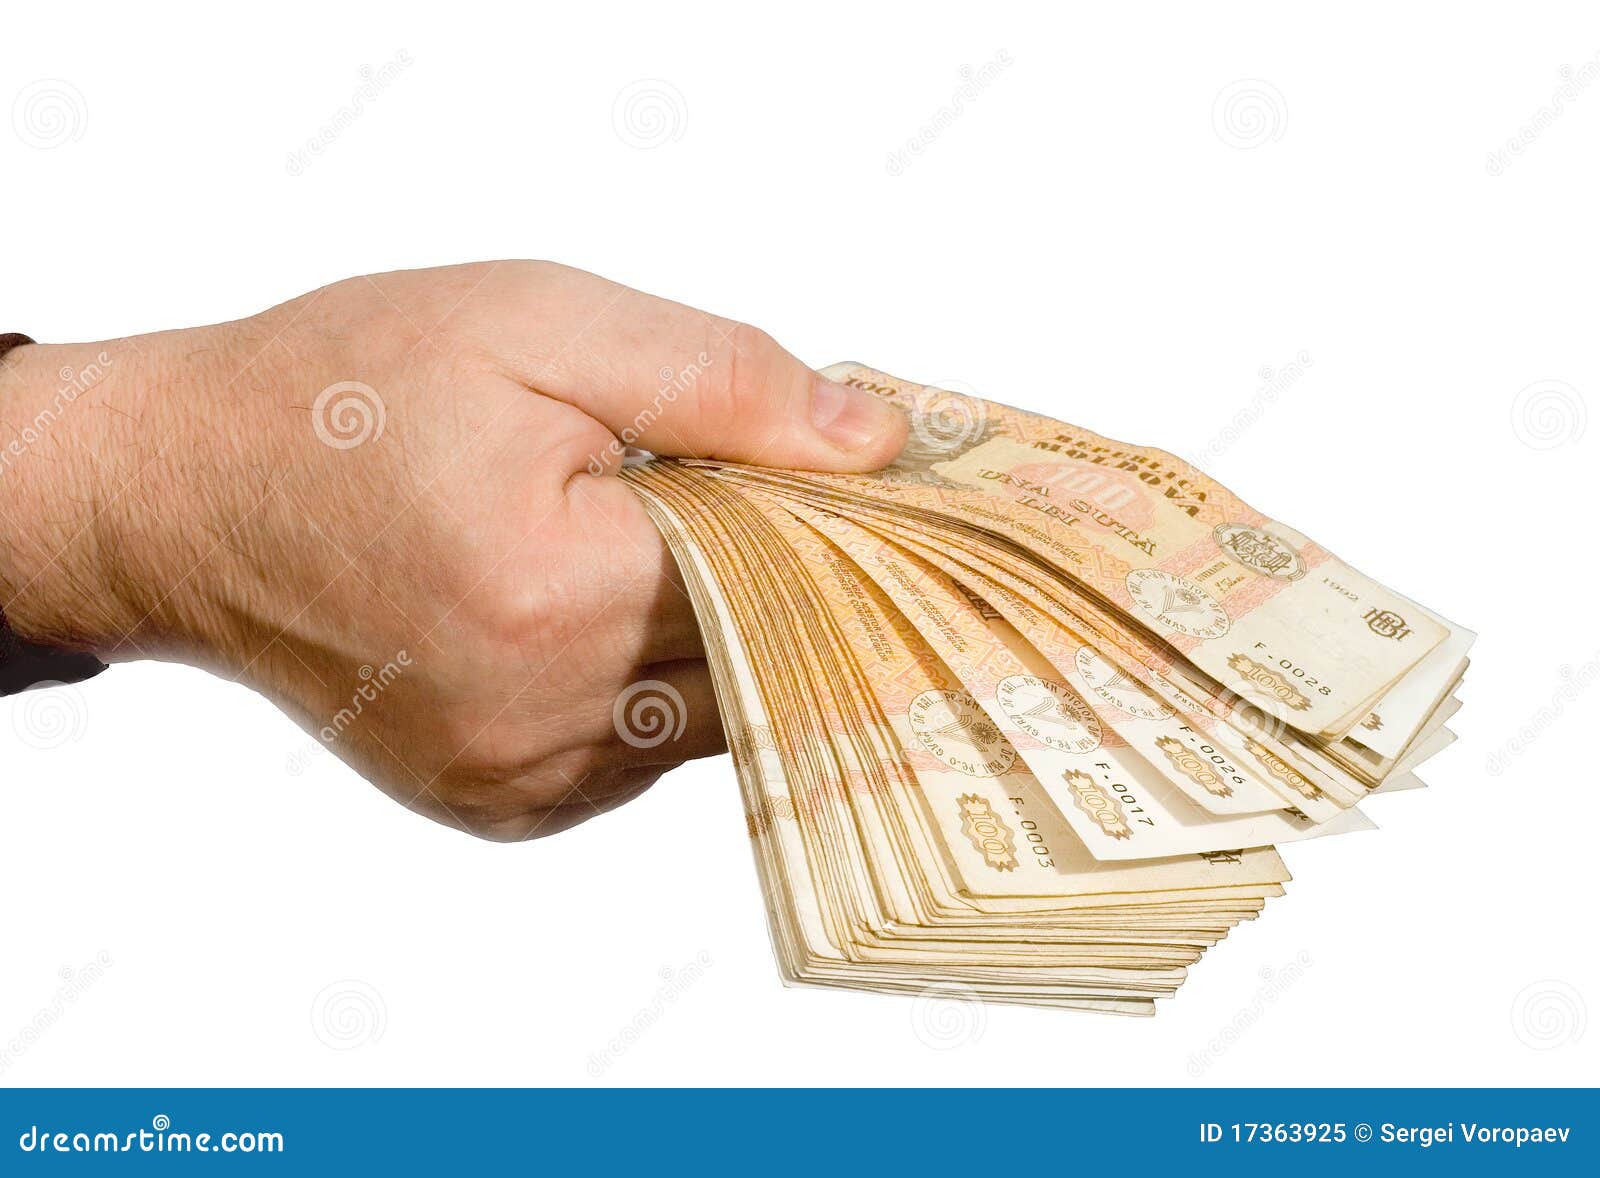 Business Finance Money Loan Proposal Stock Image - Image of commercial ...